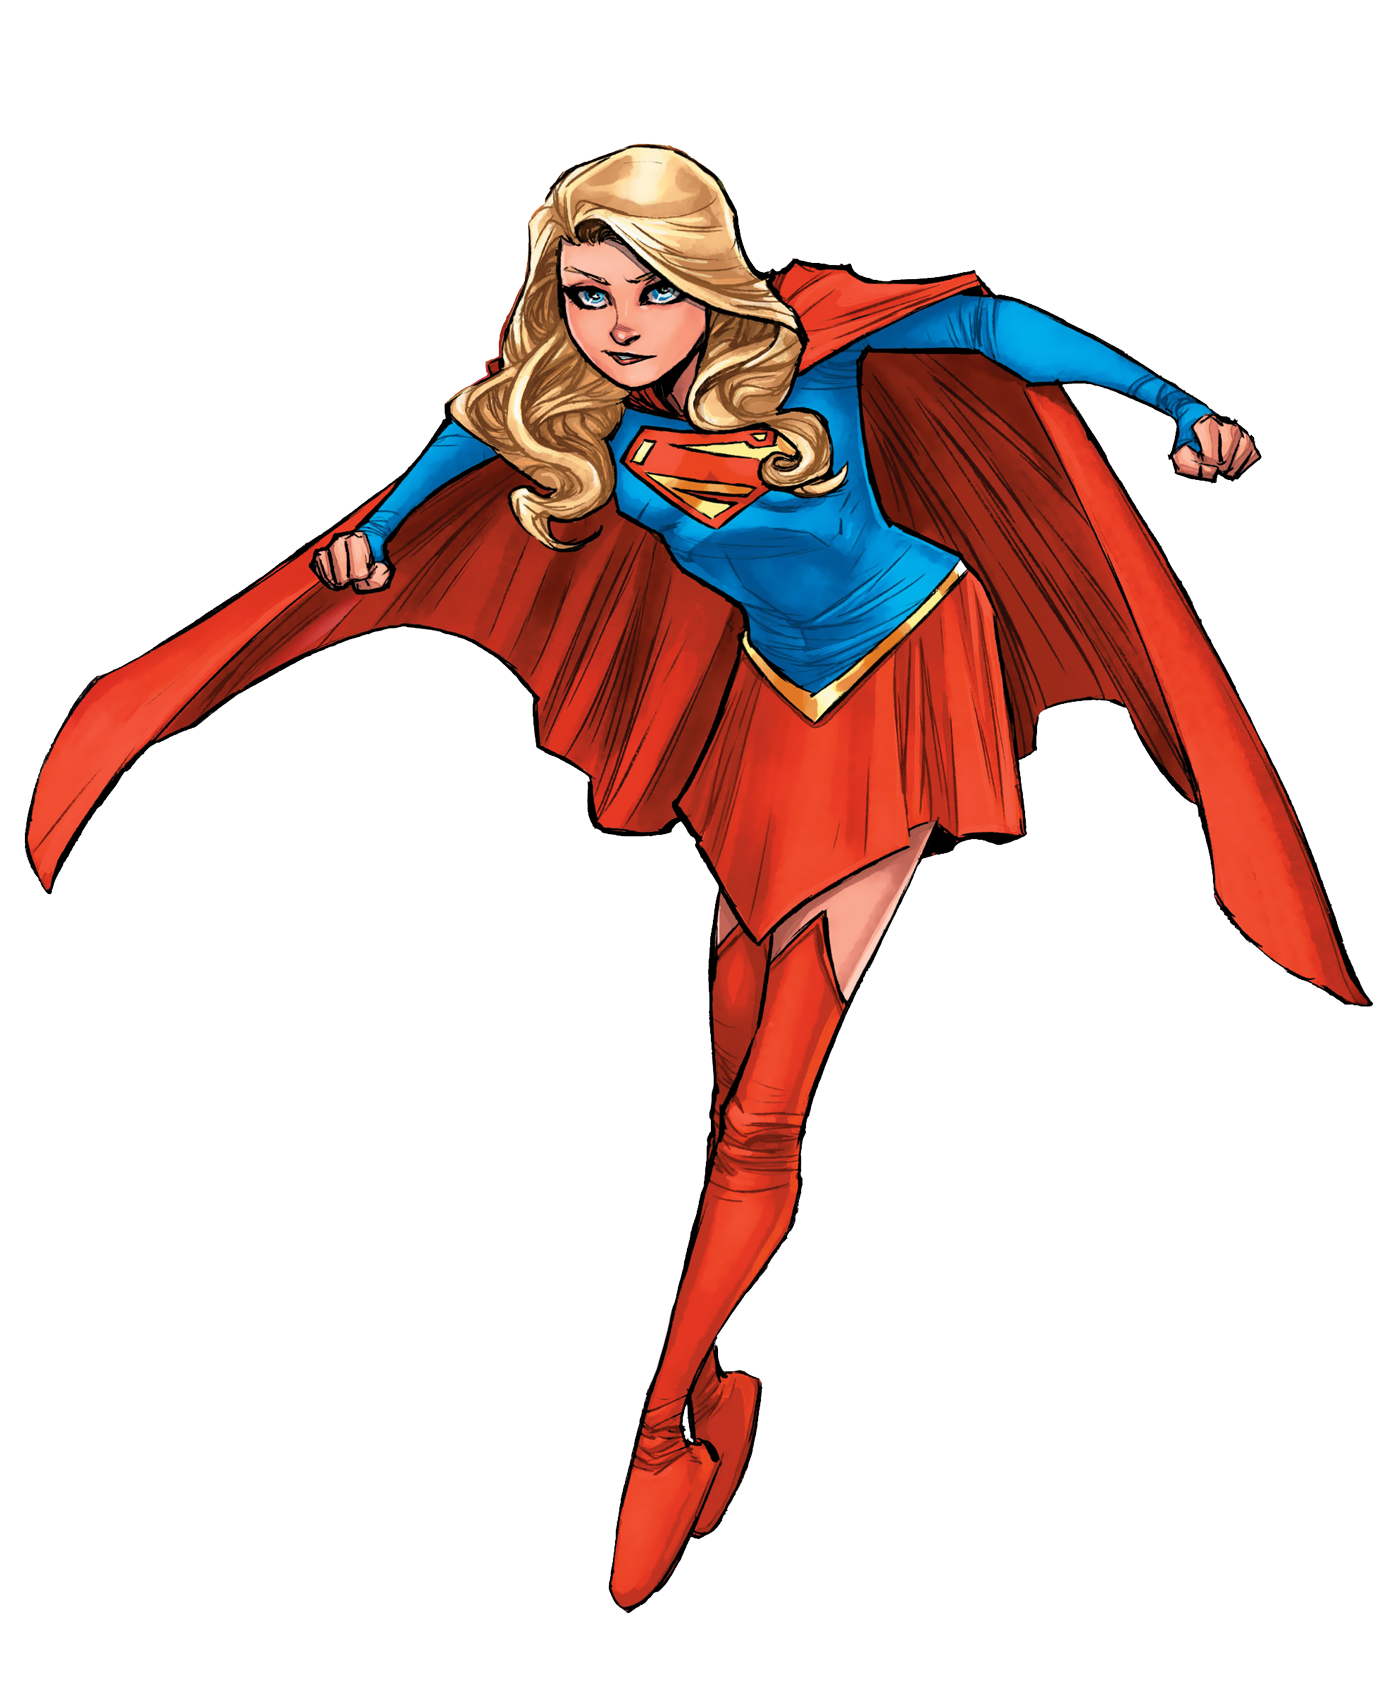 Supergirl PNG Image with Transparent Background